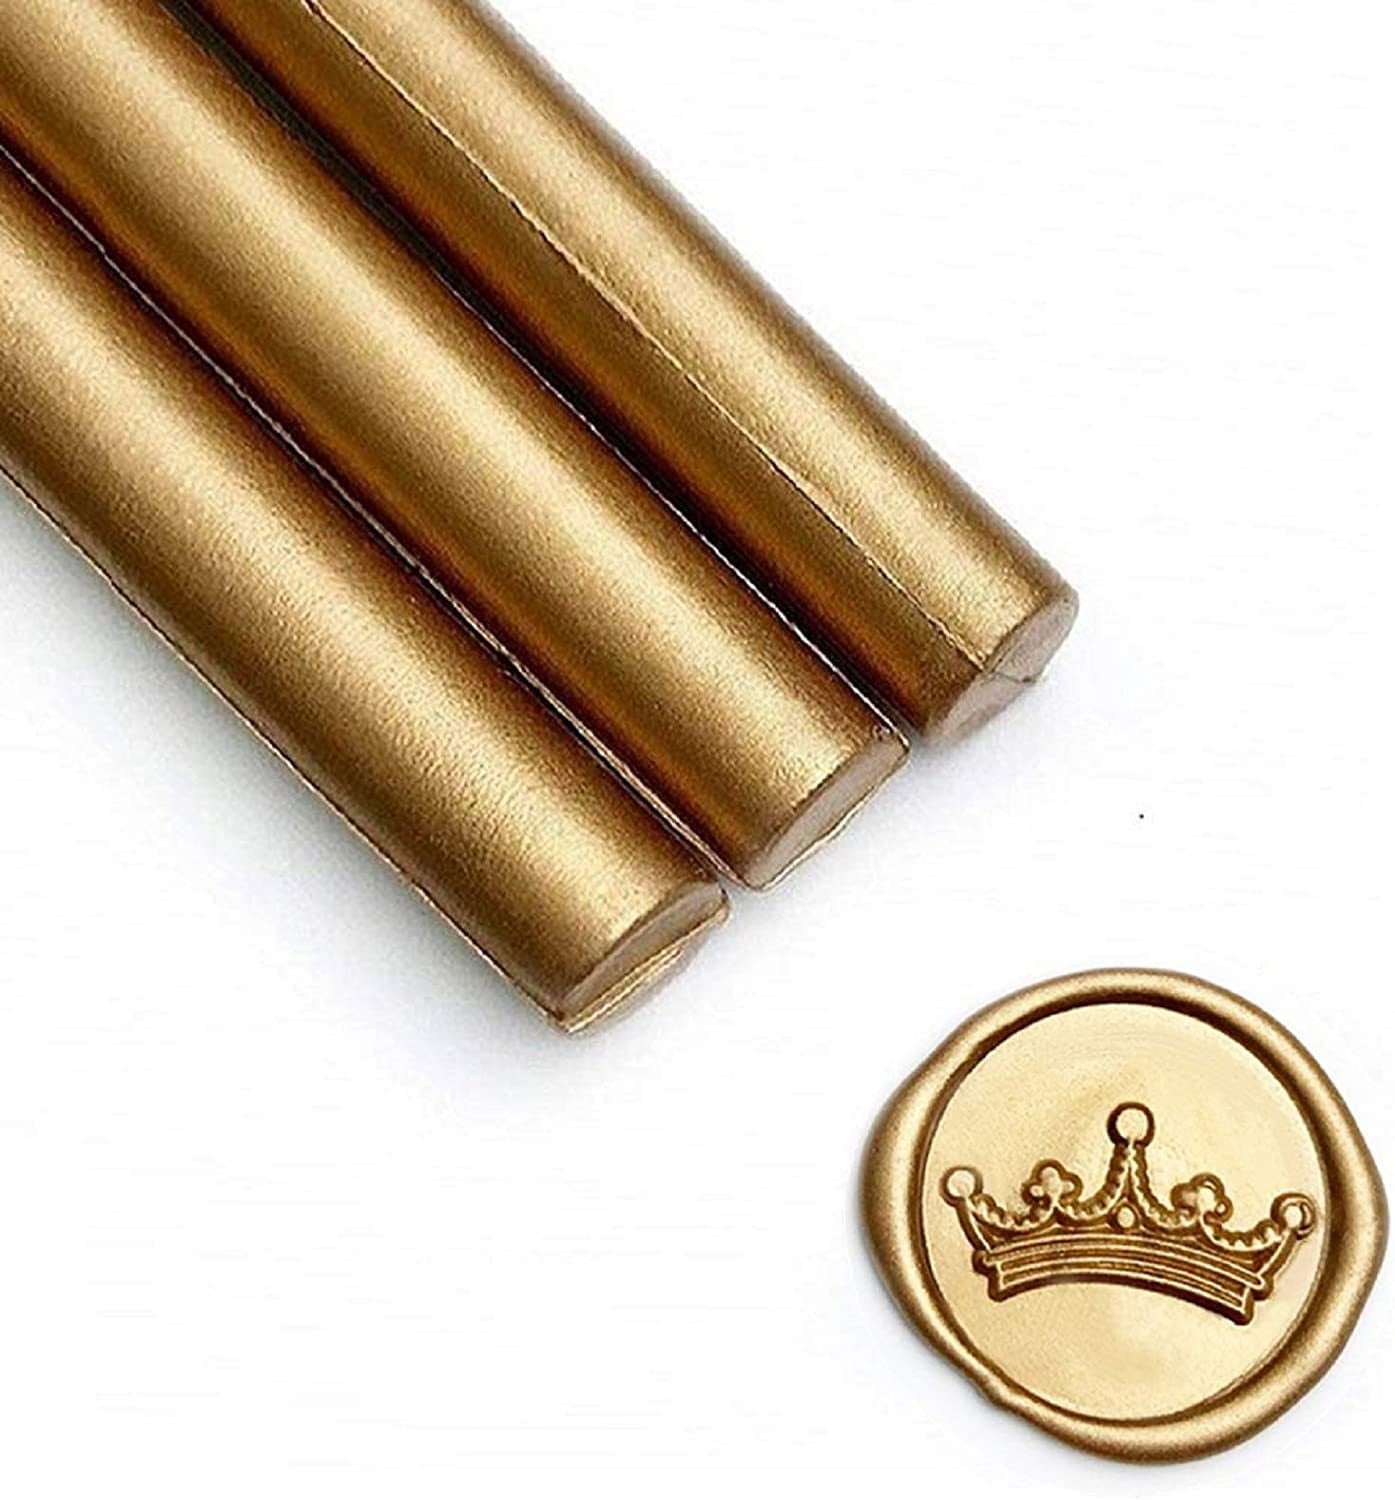  Antique Gold Wax Seal Sticks 20pcs, Andotopee Glue Gun Wax  Seal Sticks For Wax Seal Stamp, Premium Sealing Wax For Envelope Letter  Seal Wedding Invation Craft Adhesive, Great Gift Ideas